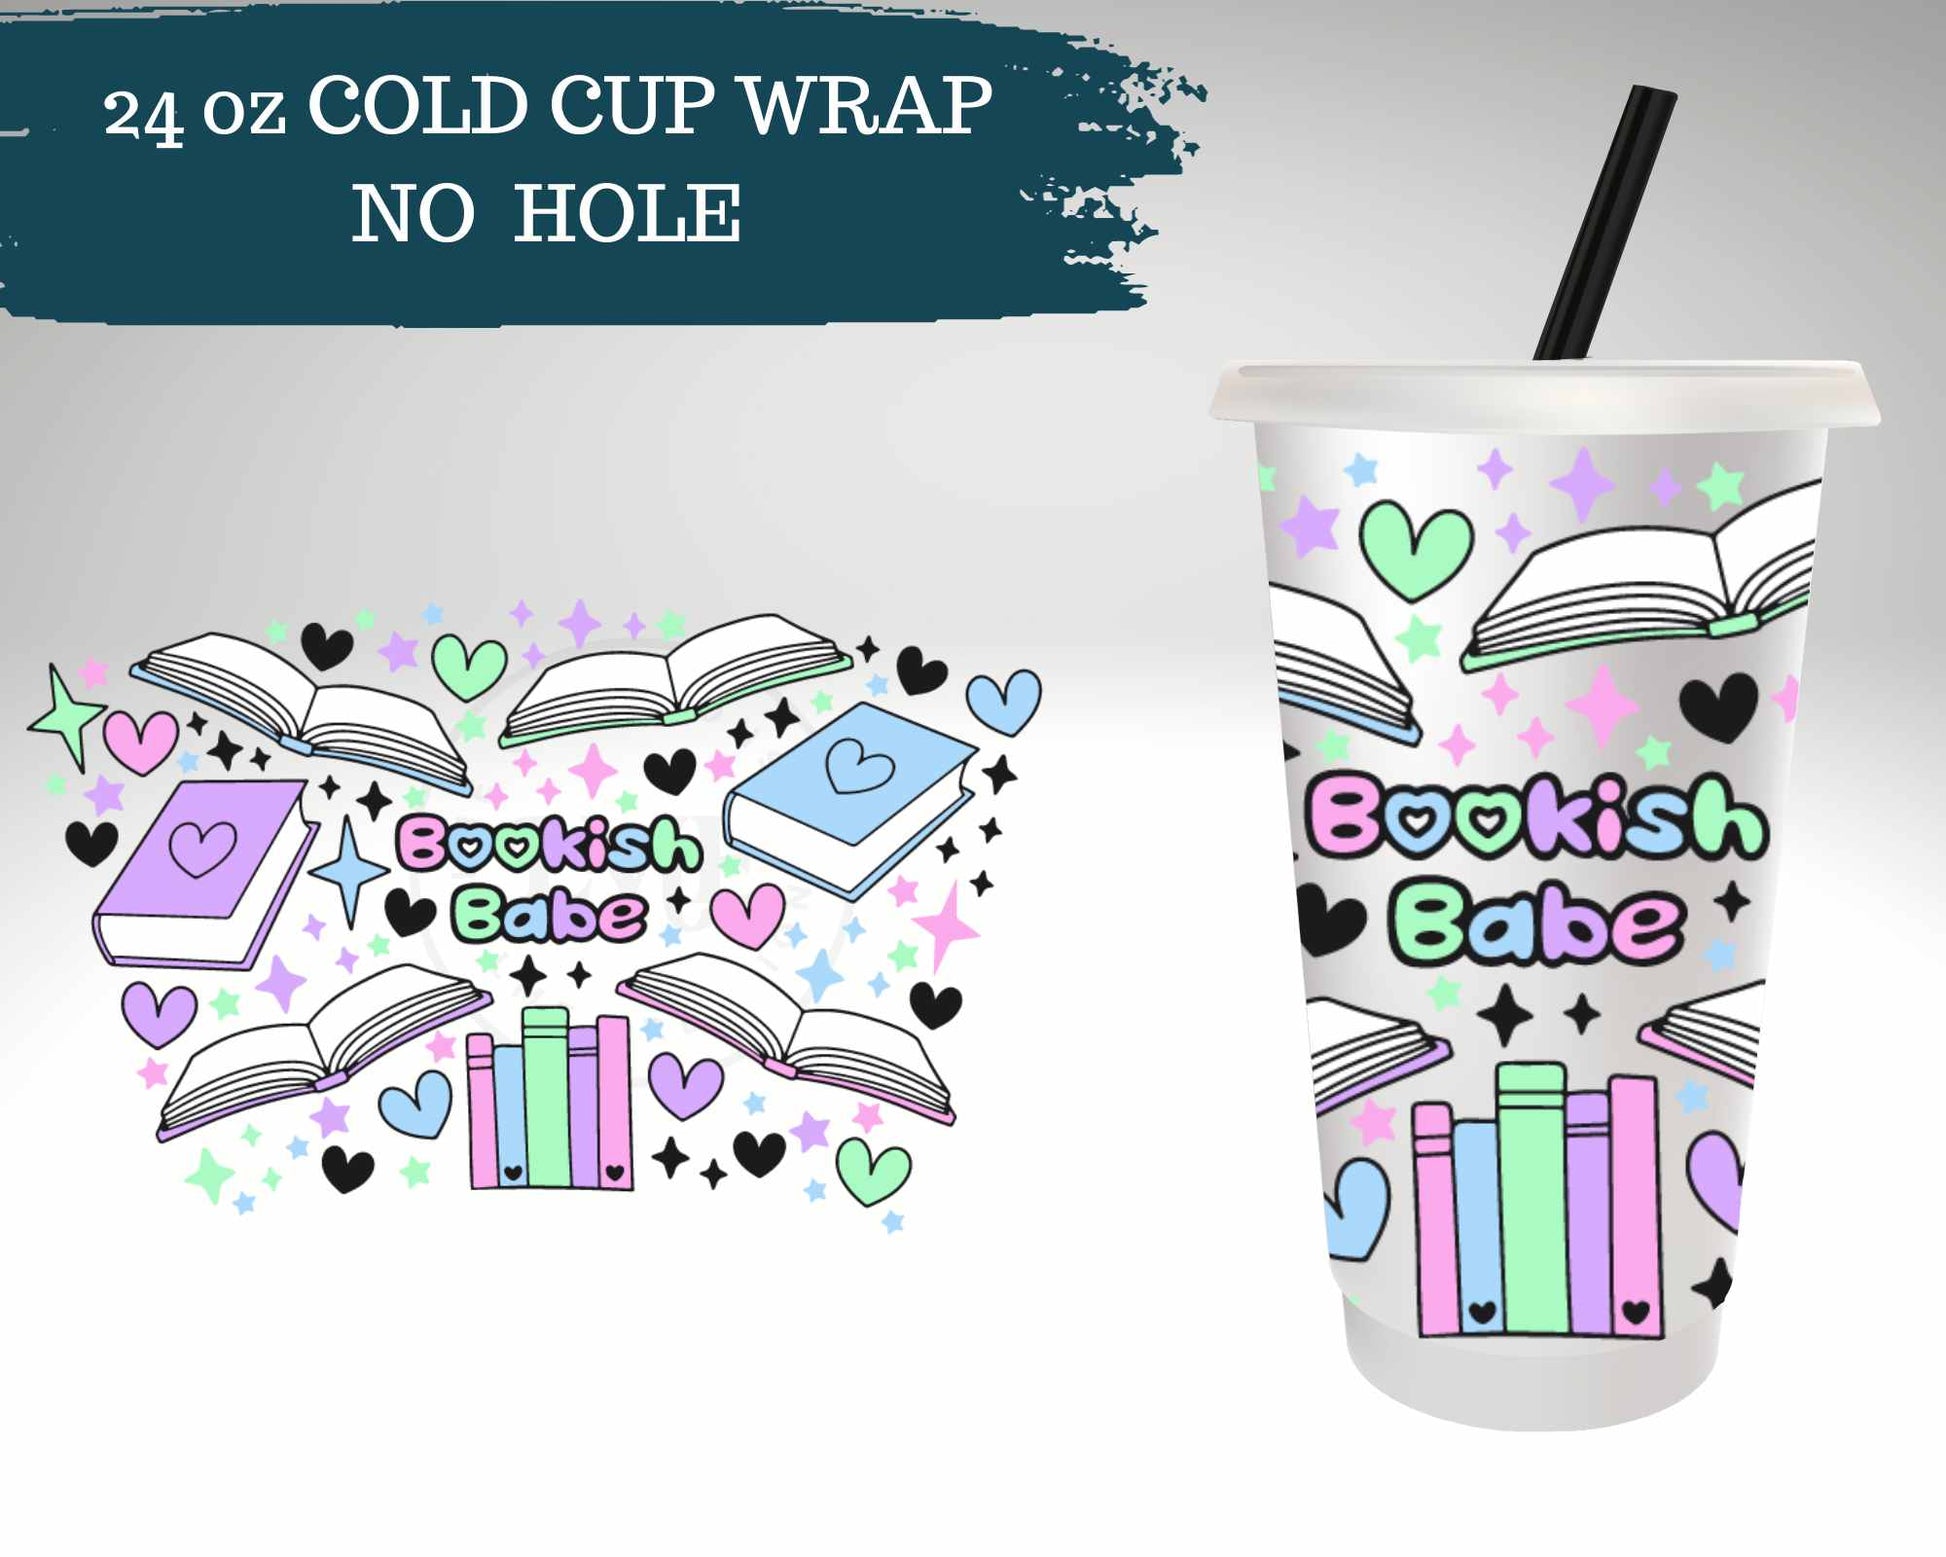 Bookish Babe | NO HOLE | Cold Cup Wrap